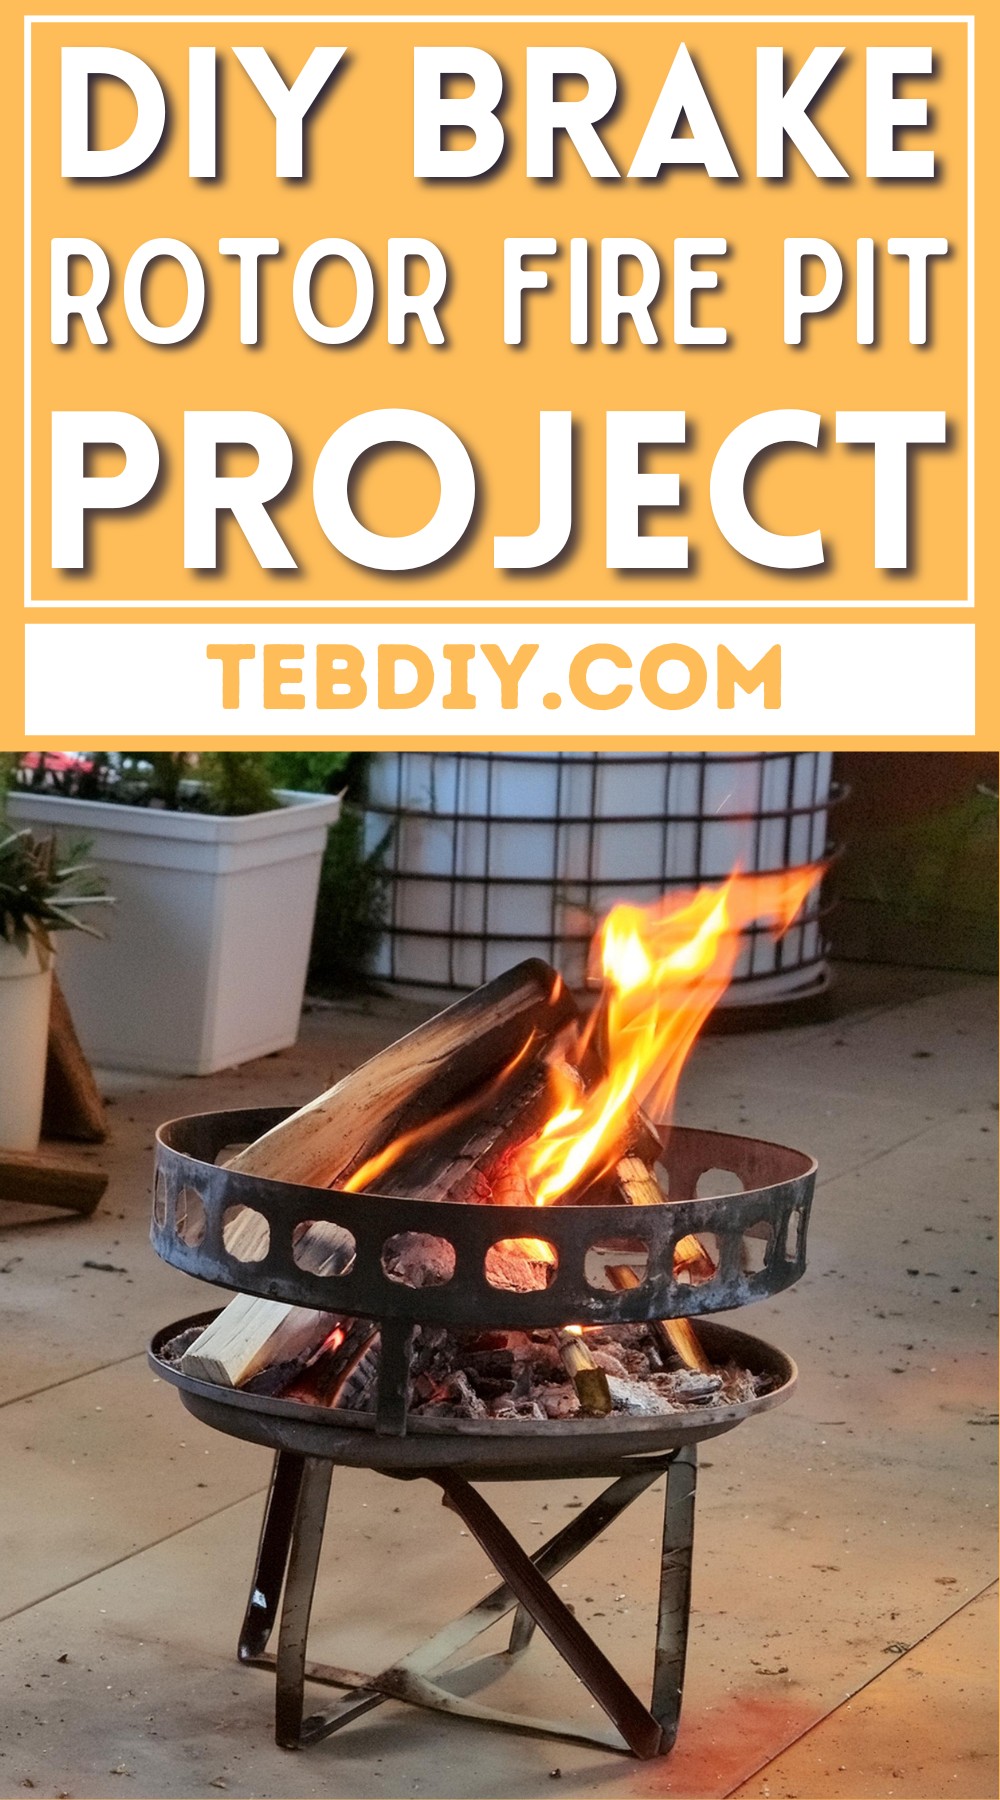 DIY Brake Rotor Fire Pit Project